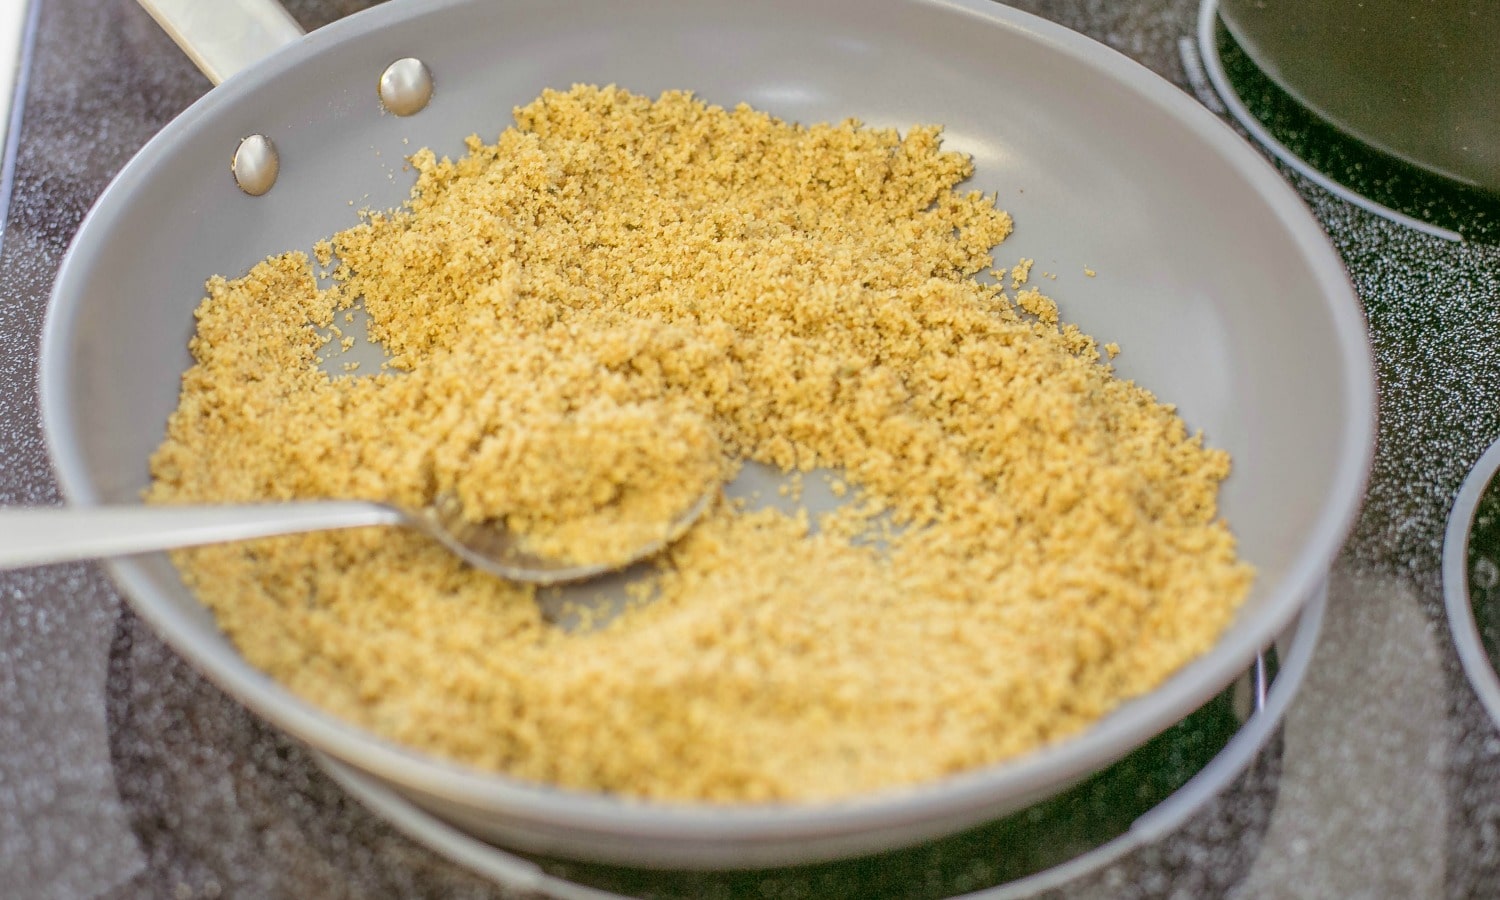 The first step for One Pot Pasta and Clam Sauce is to brown the bread crumbs.